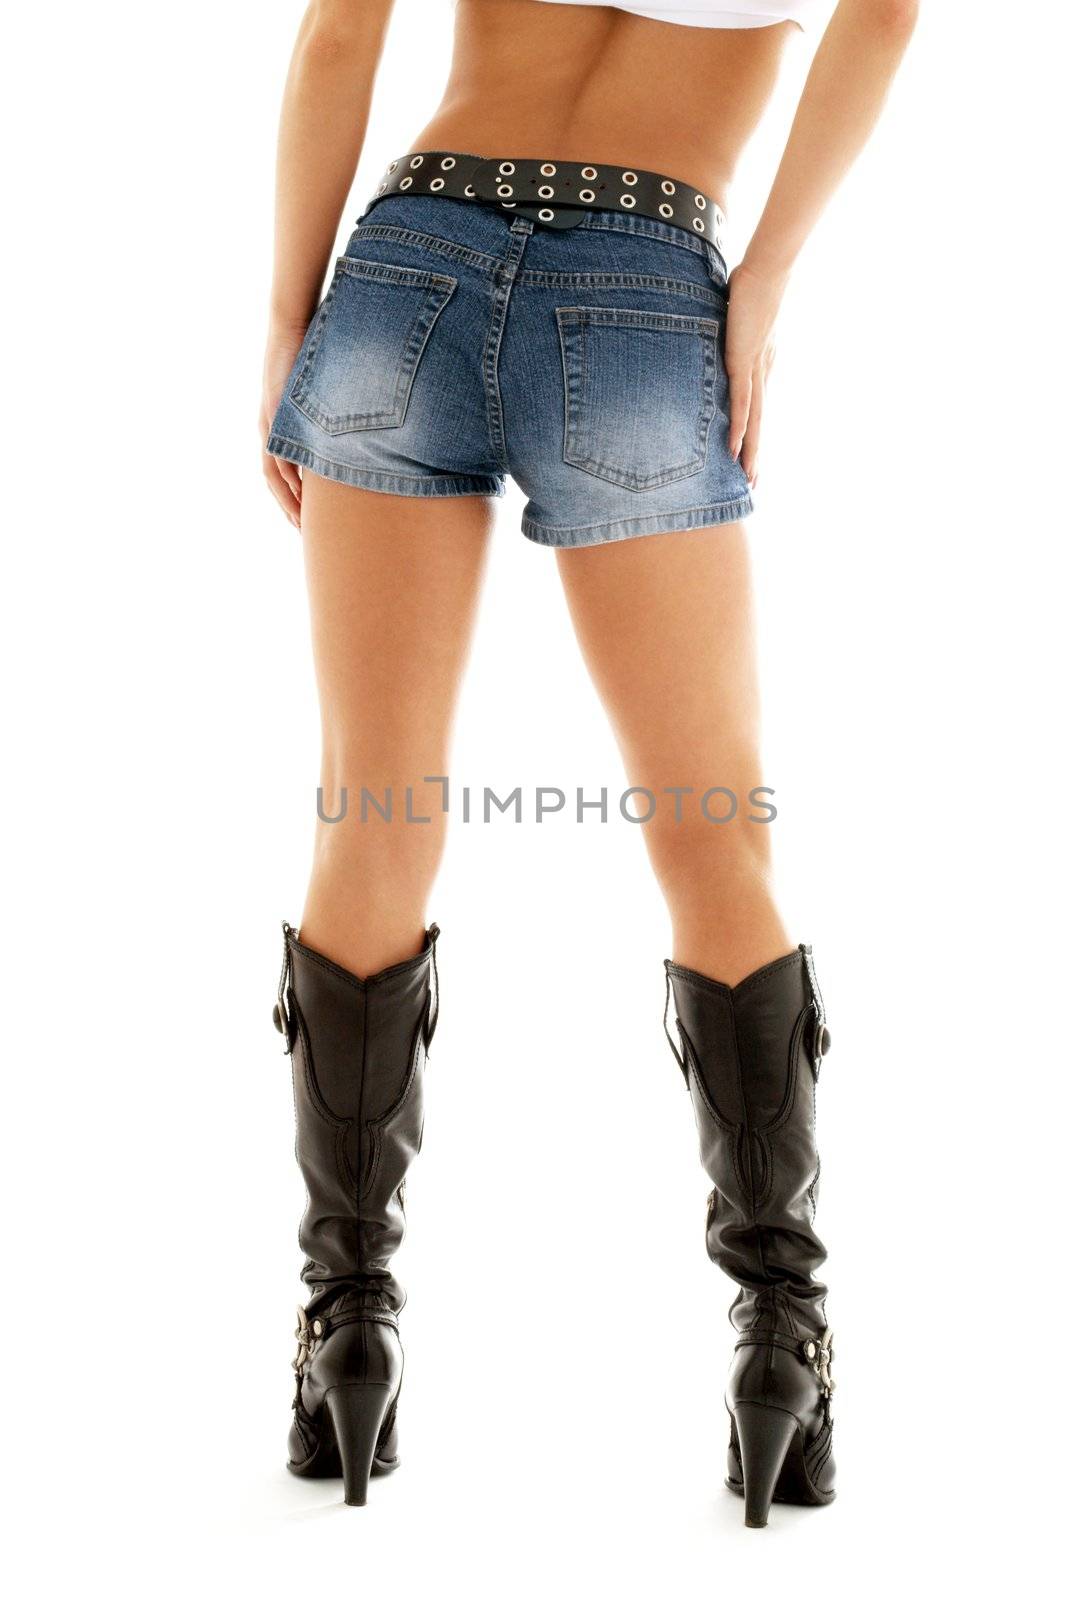 long legs in cowboy boots and denim shorts over white